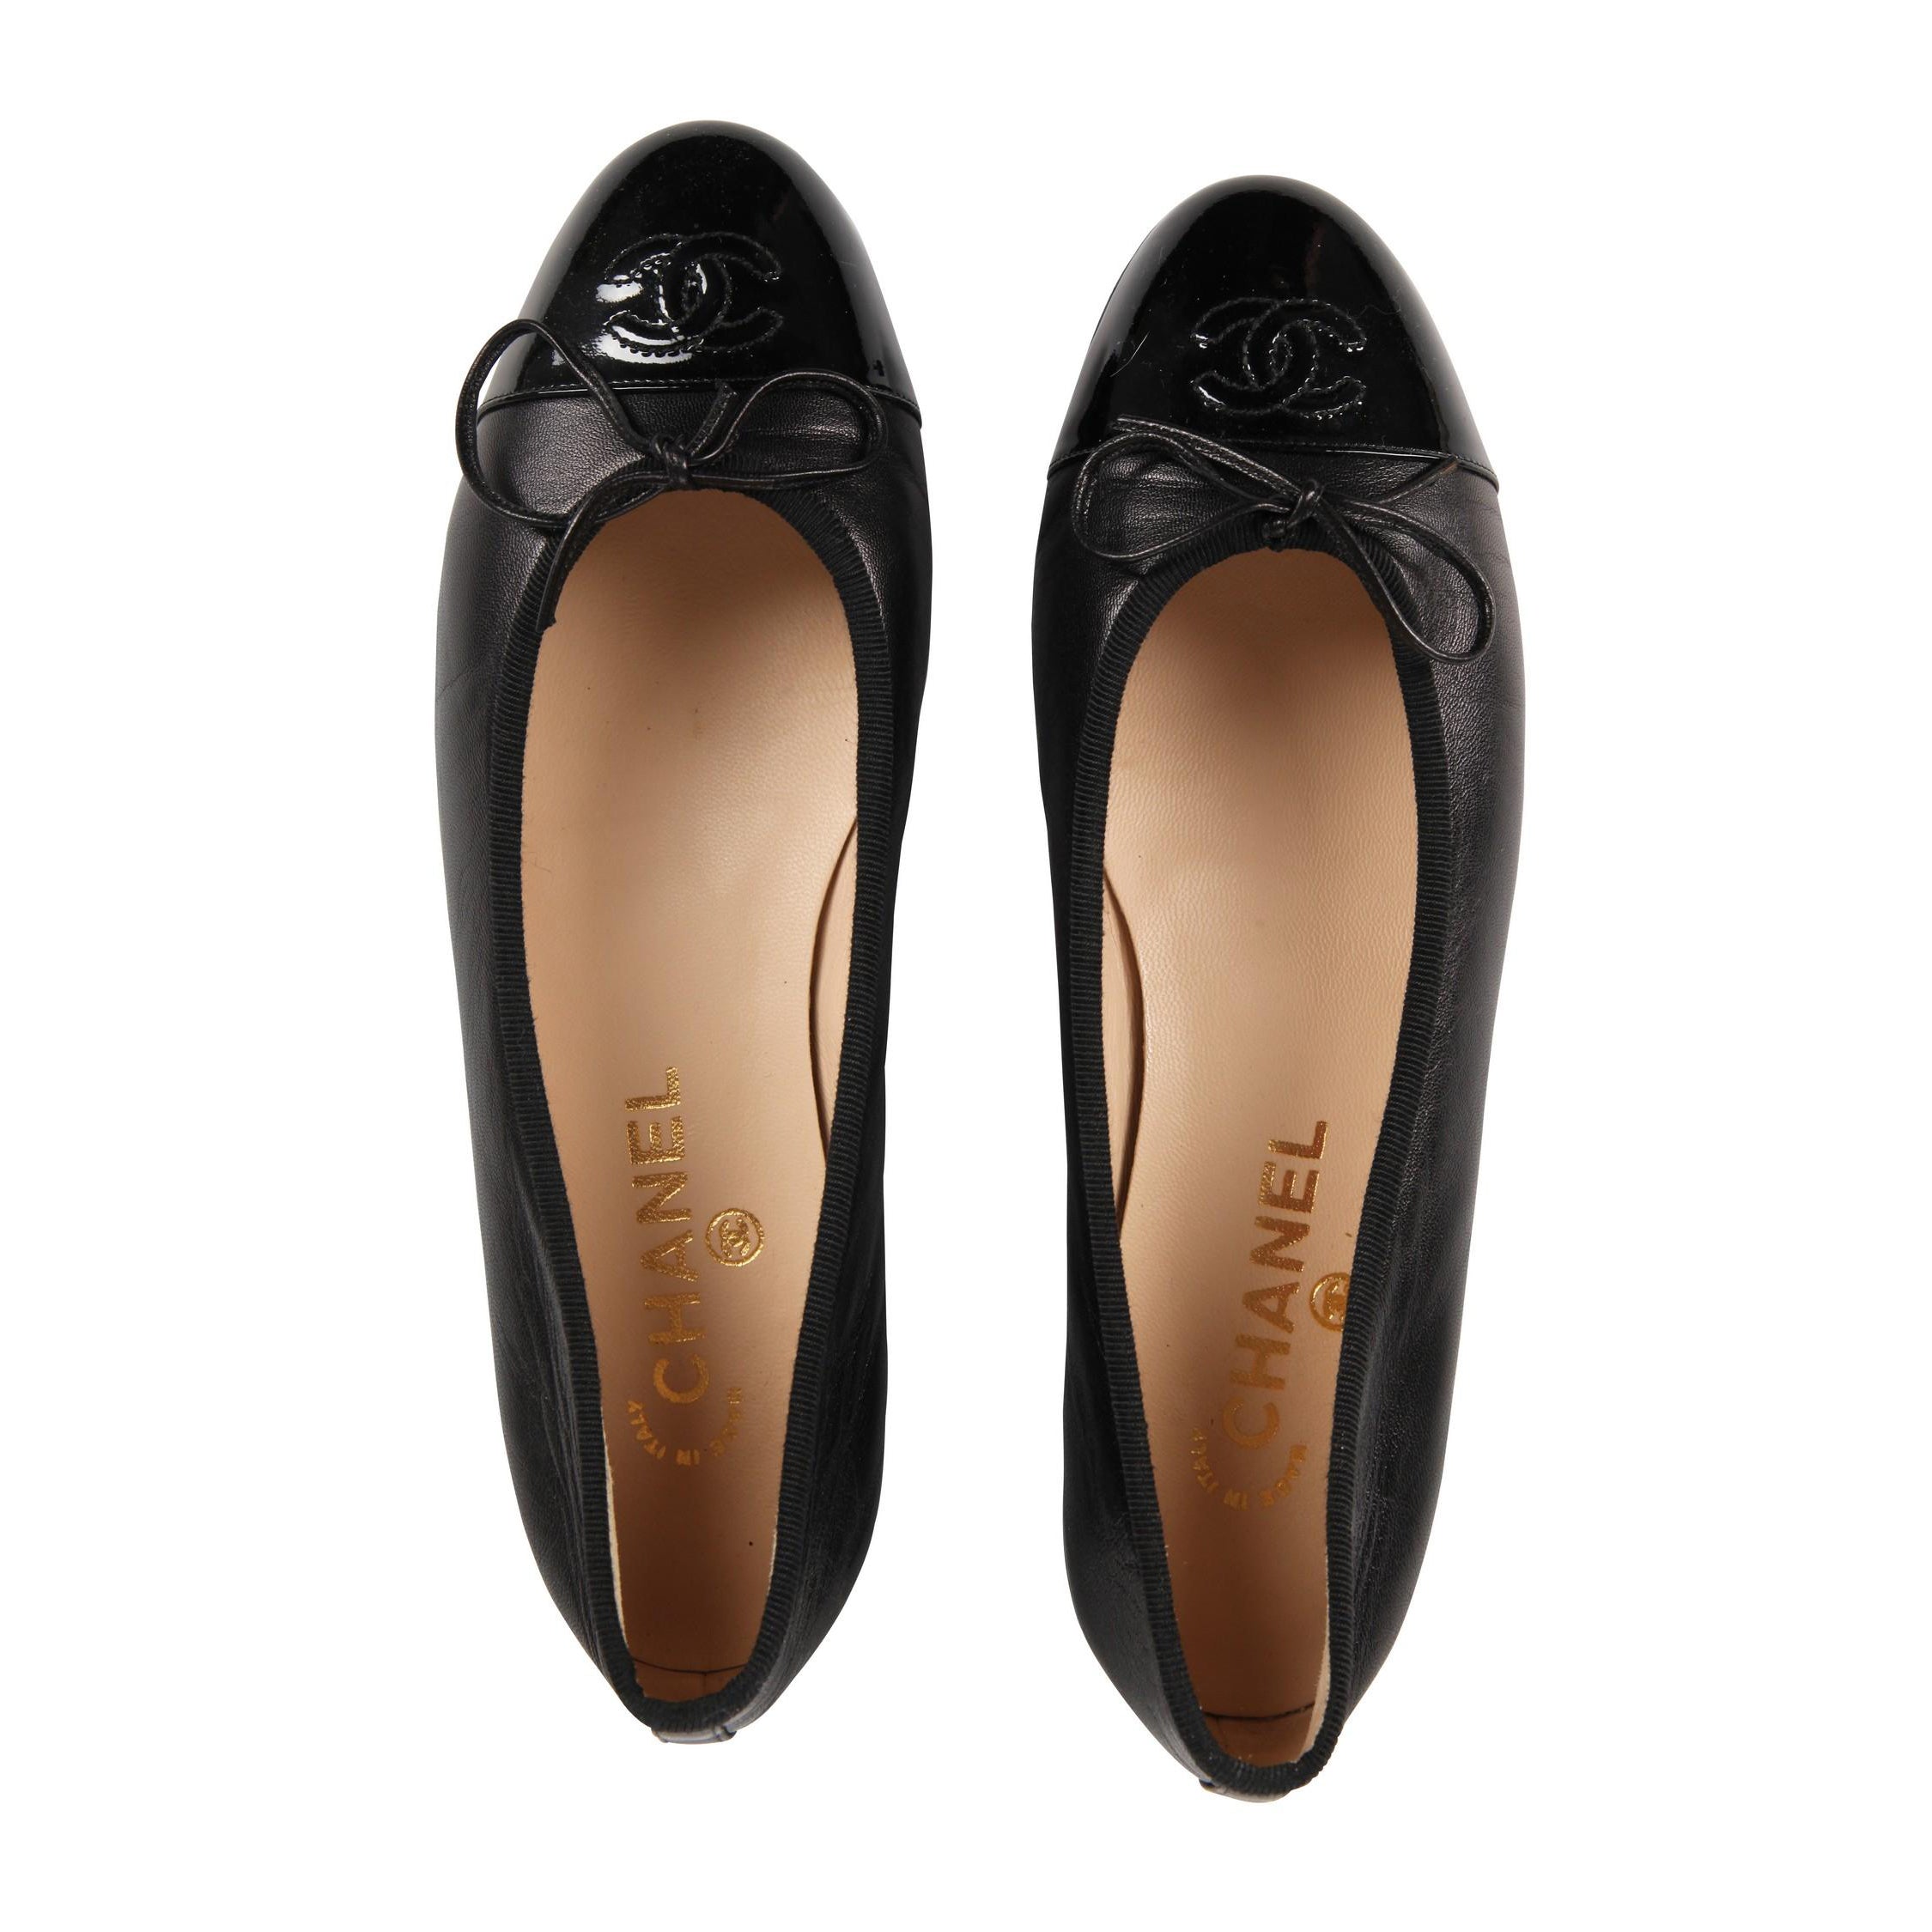 Leather ballet flats Chanel Black size 38 EU in Leather - 36645126